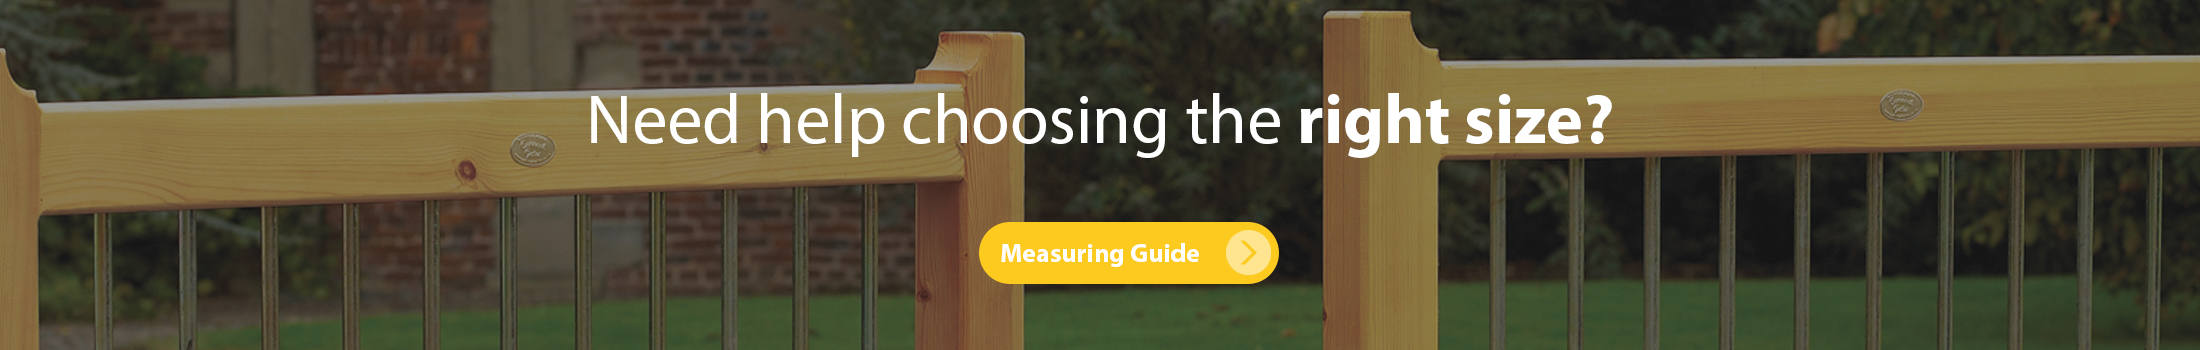 Read the measuring guide